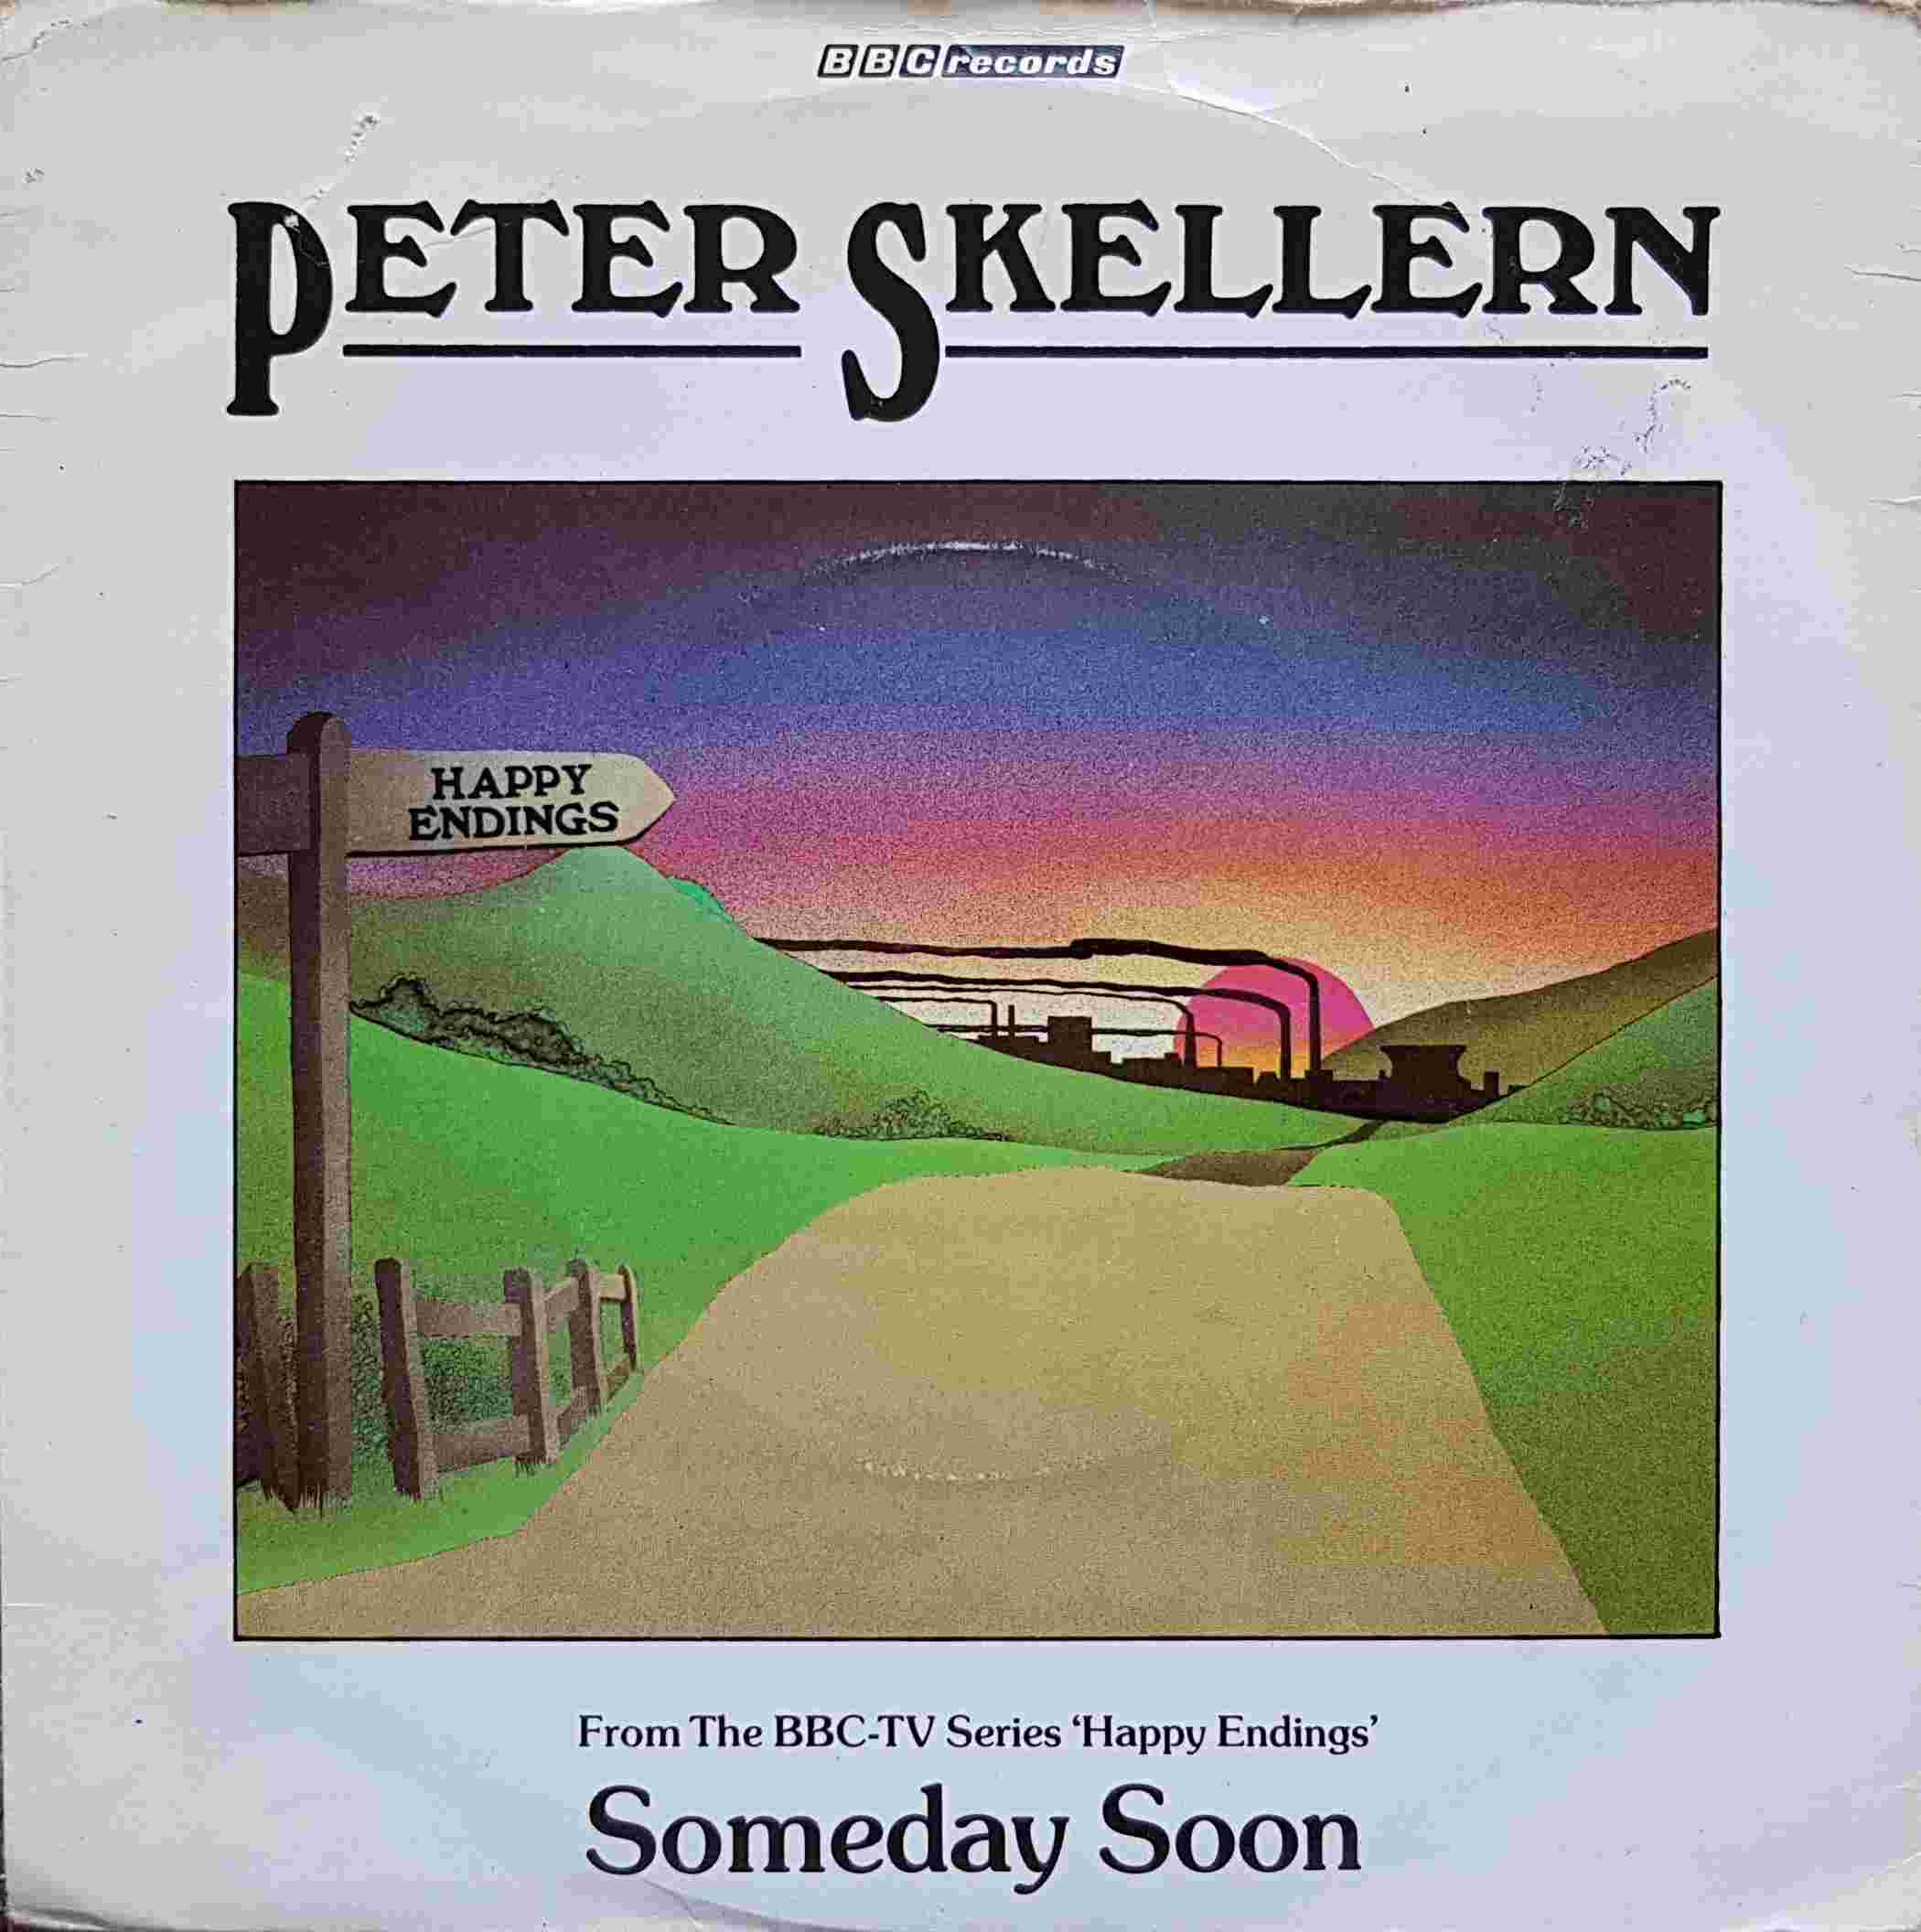 Picture of RESL 105 Someday soon (Happy endings) single by artist Peter Skellern from the BBC records and Tapes library